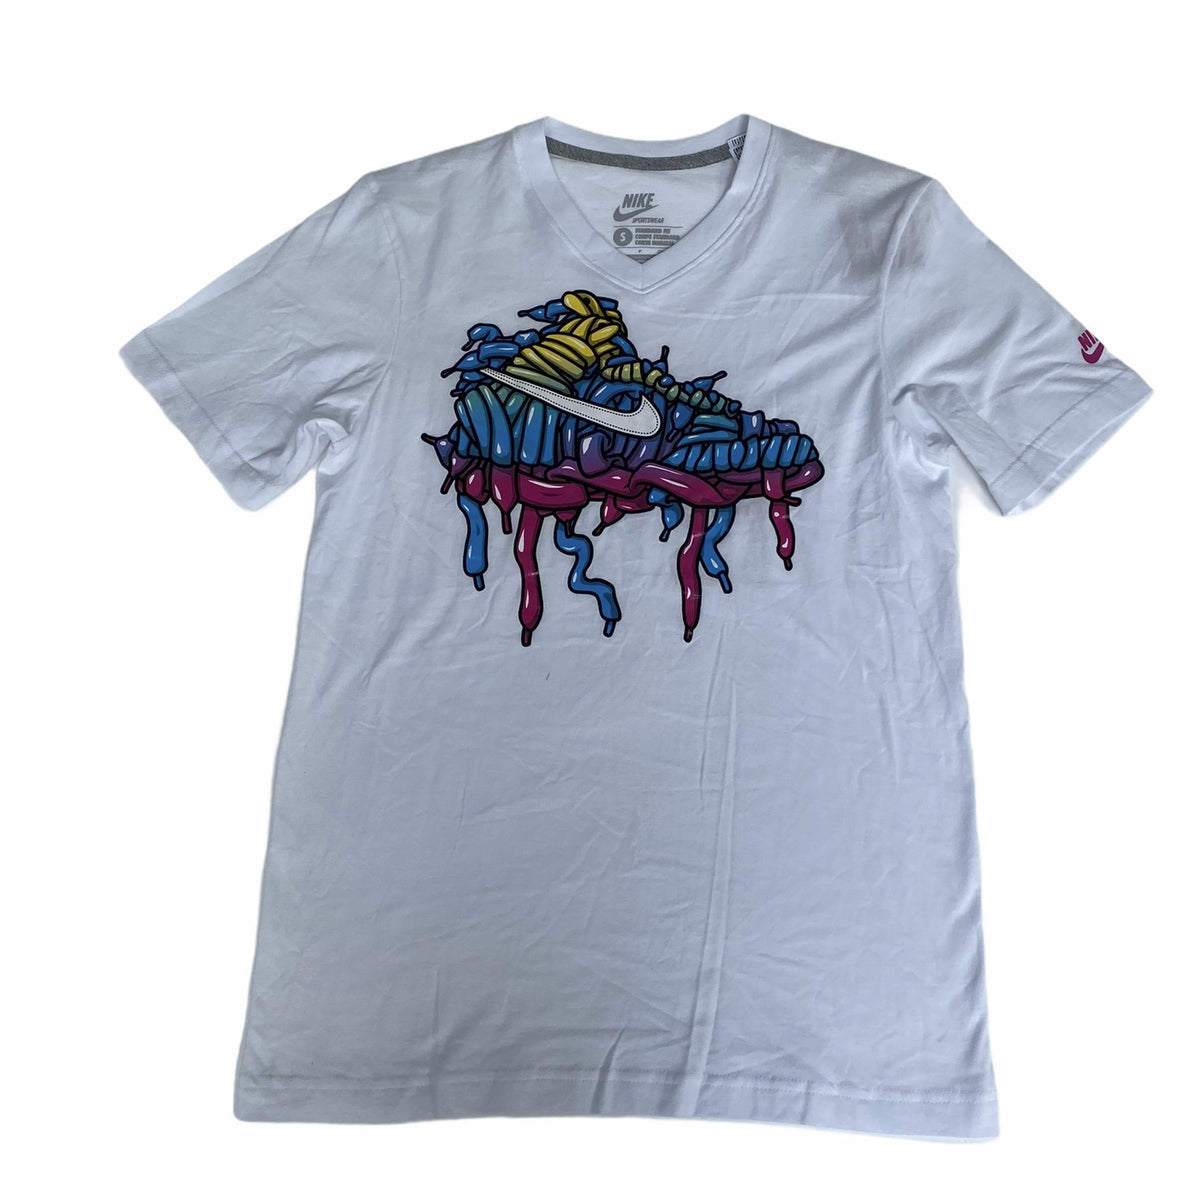 VINTAGE 2011 NIKE DUNK GRAPHIC PRINT T-SHIRT - Not In Your Wardrobe™ - [Vendor]